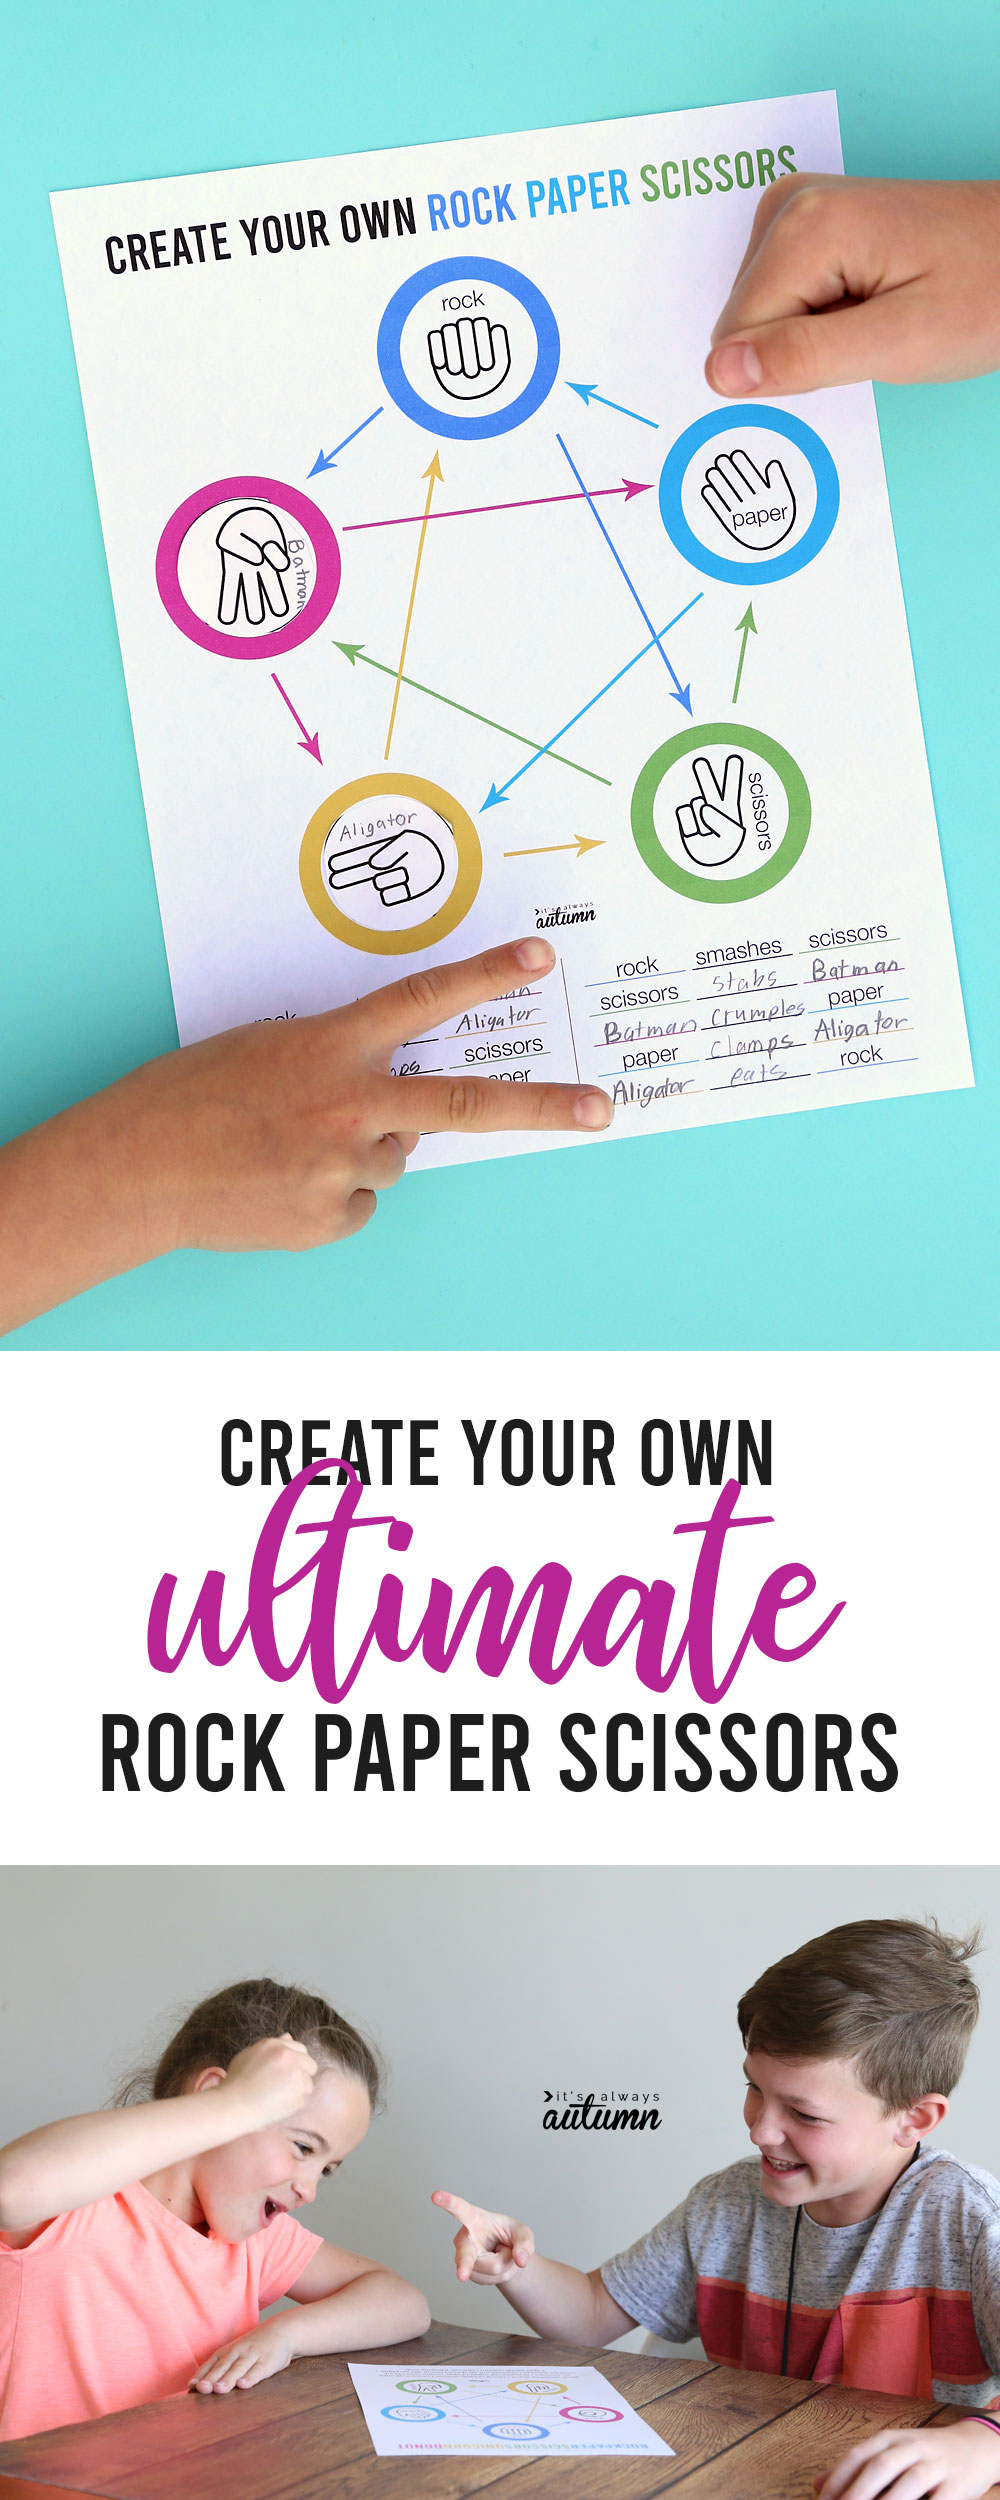 Create your own ultimate rock paper scissors printable and kids playing rock paper scissors